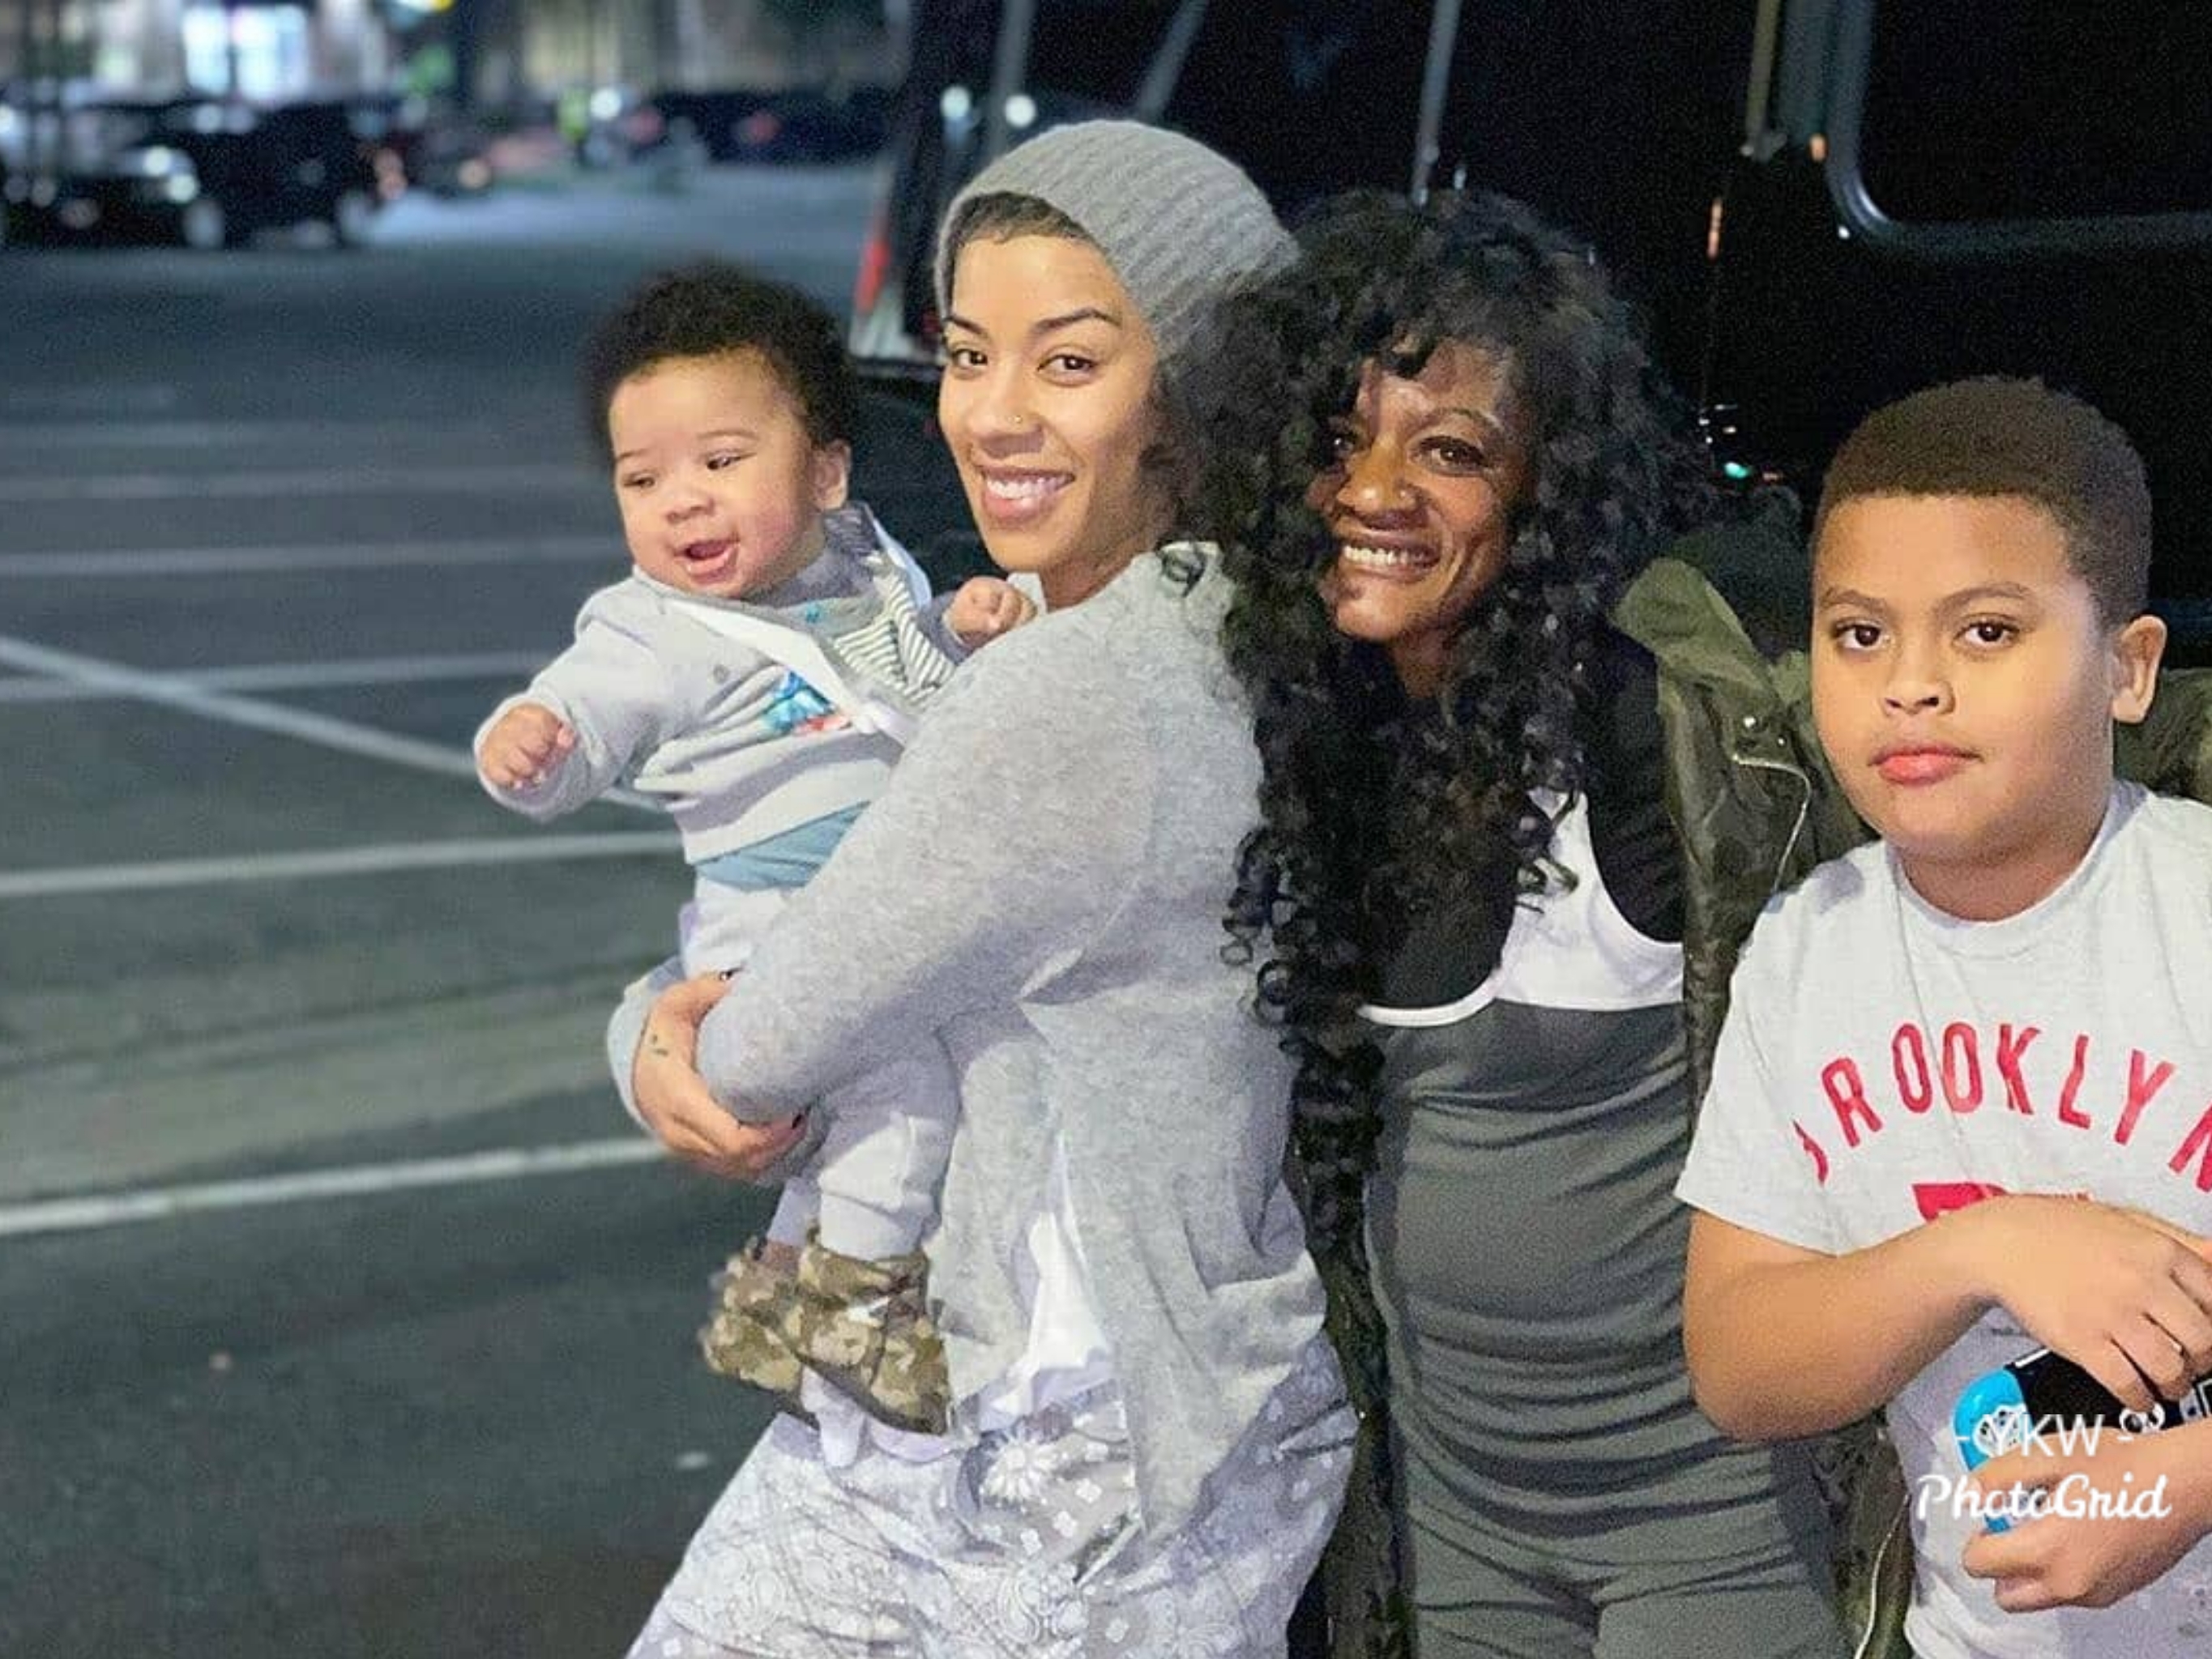 Keyshia Cole Commends Mom Frankie Lons For Seeking Treatment On Her Own